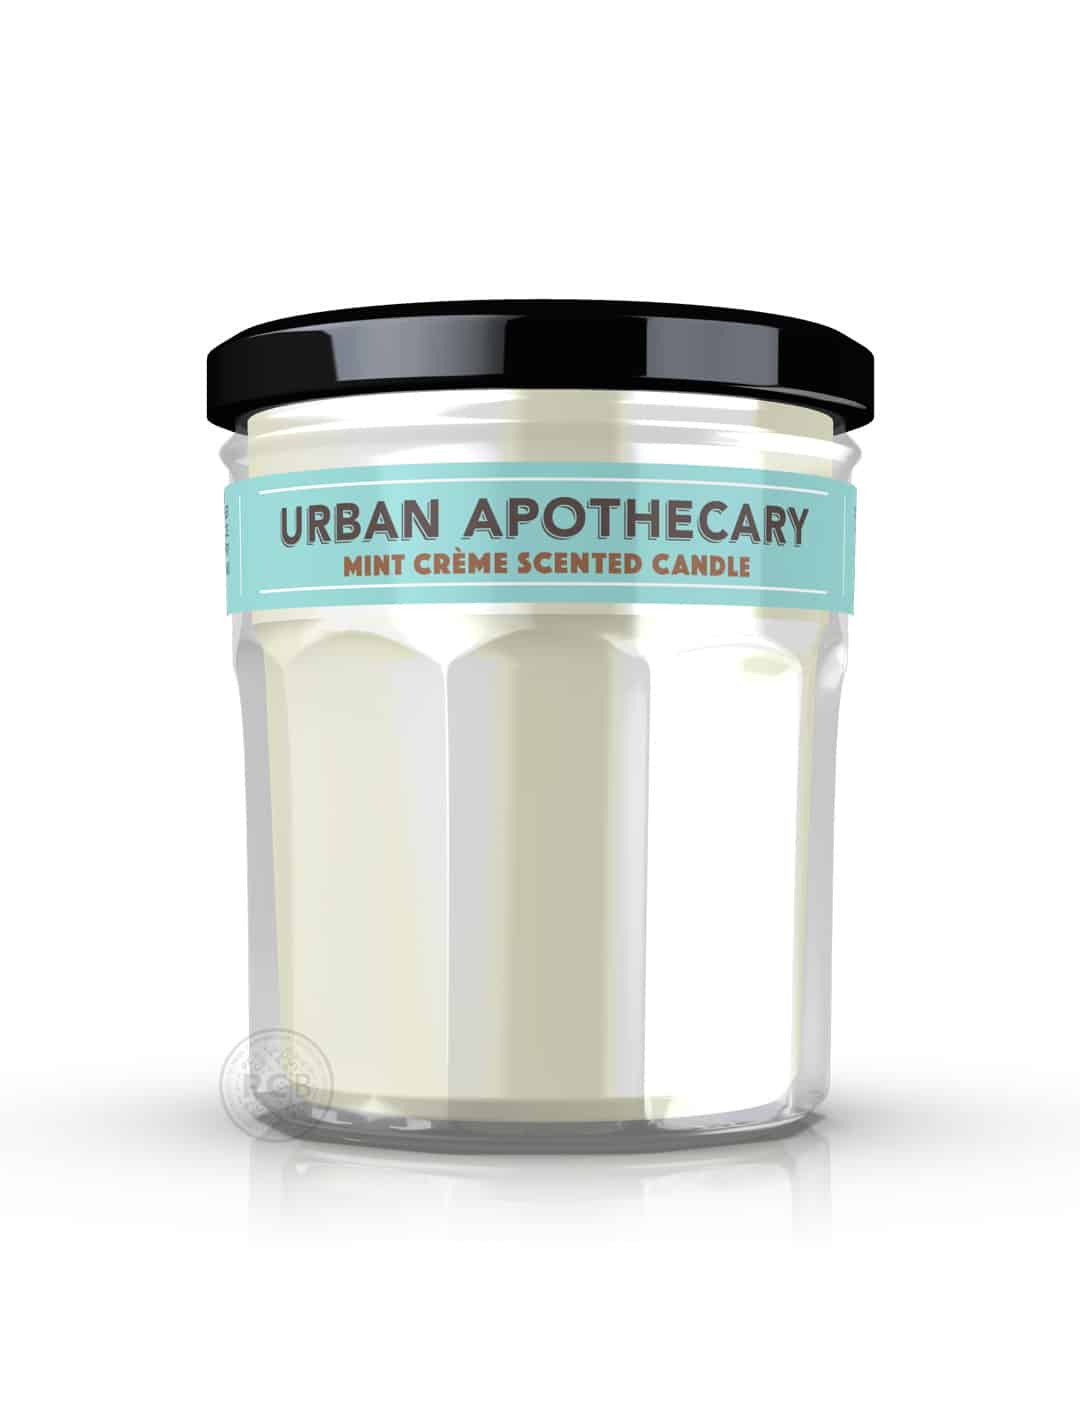 Boots jam jar labelling for English dessert-inspired fragranced candle brand, Urban Apothecary designed by Paul Cartwright Branding.